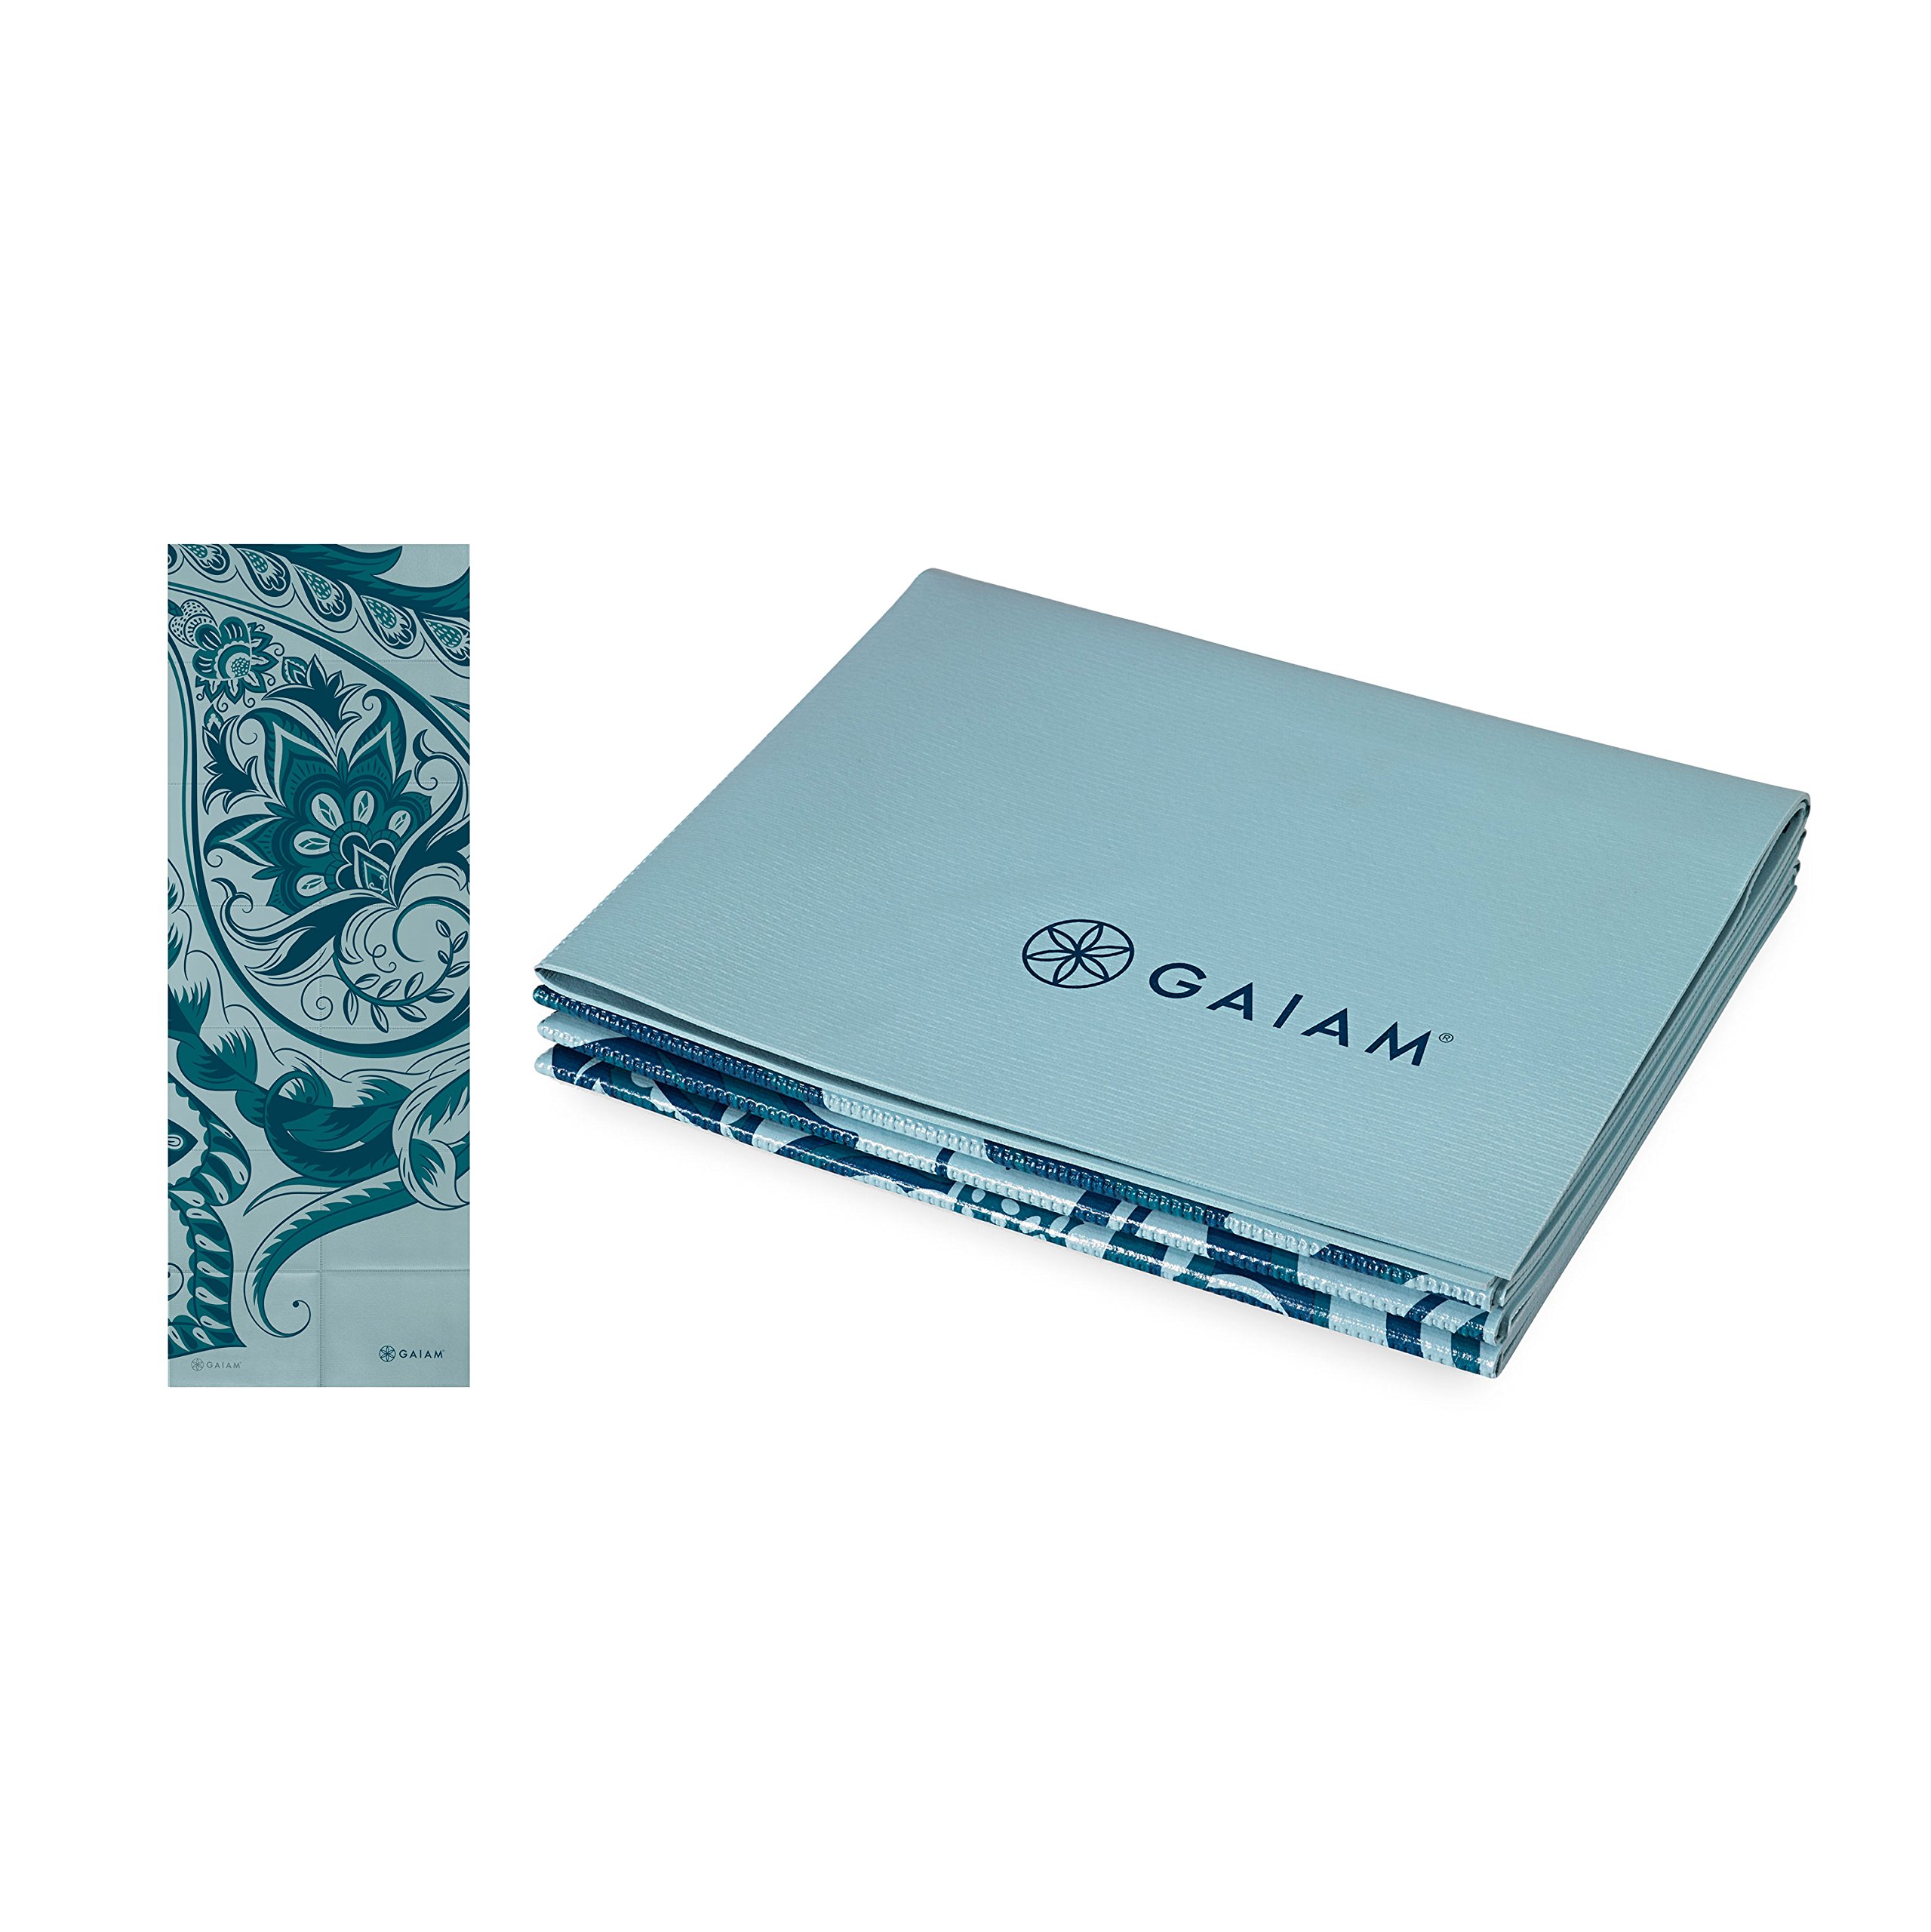 Gaiam Yoga Mat Folding Travel Fitness & Exercise Mat | Foldable Yoga Mat for All Types of Yoga, Pilates & Floor Workouts, Icy Pa